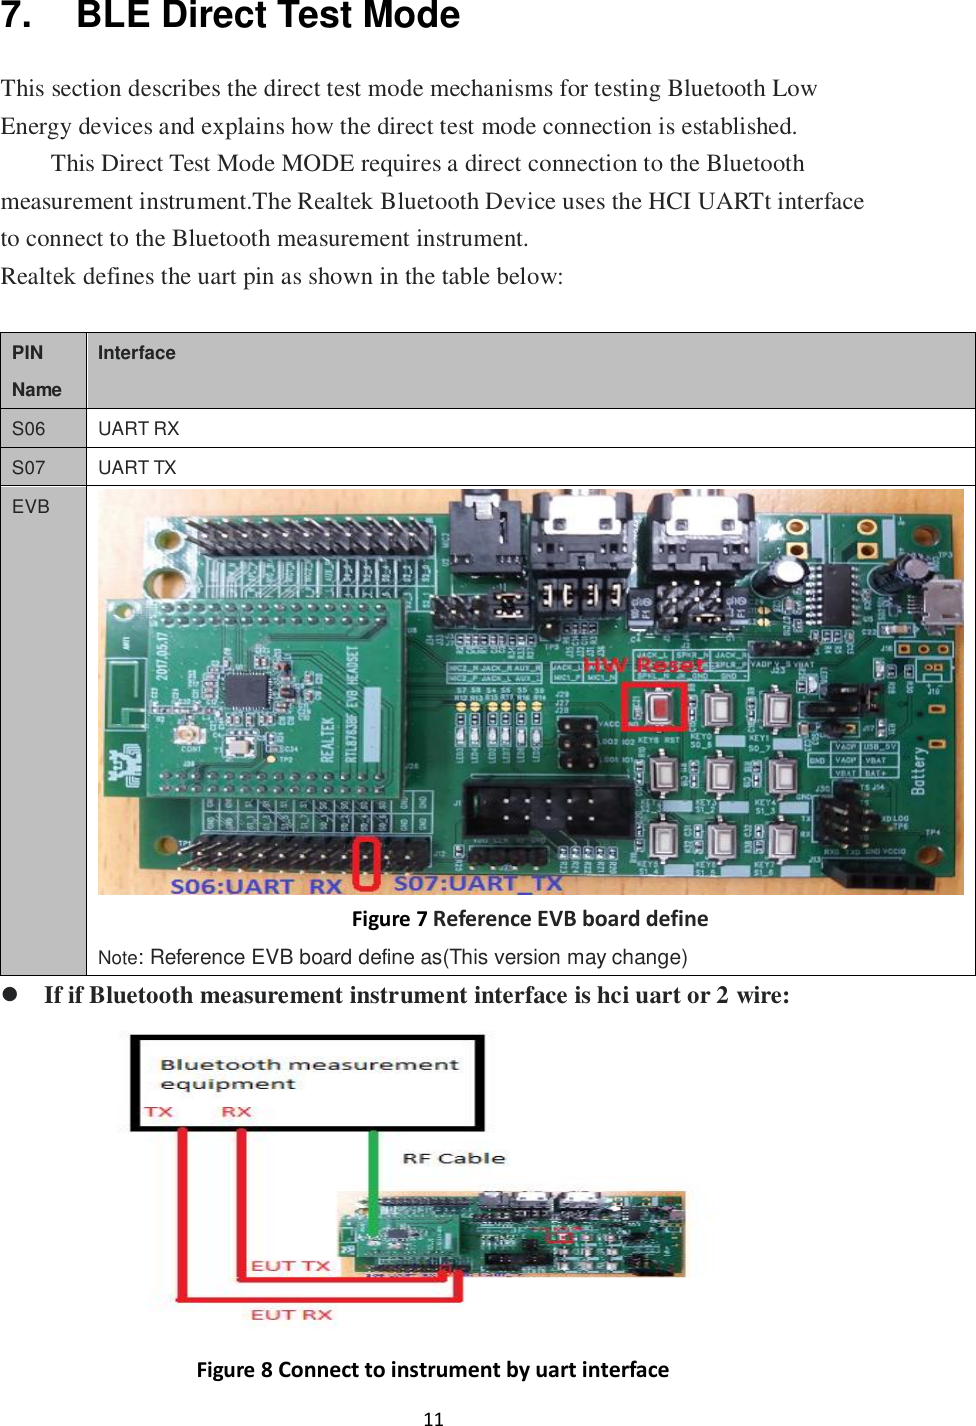 11  7.  BLE Direct Test Mode This section describes the direct test mode mechanisms for testing Bluetooth Low Energy devices and explains how the direct test mode connection is established. This Direct Test Mode MODE requires a direct connection to the Bluetooth measurement instrument.The Realtek Bluetooth Device uses the HCI UARTt interface to connect to the Bluetooth measurement instrument. Realtek defines the uart pin as shown in the table below:  PIN Name Interface S06 UART RX S07 UART TX EVB  Figure 7 Reference EVB board define Note: Reference EVB board define as(This version may change)  If if Bluetooth measurement instrument interface is hci uart or 2 wire:    Figure 8 Connect to instrument by uart interface 